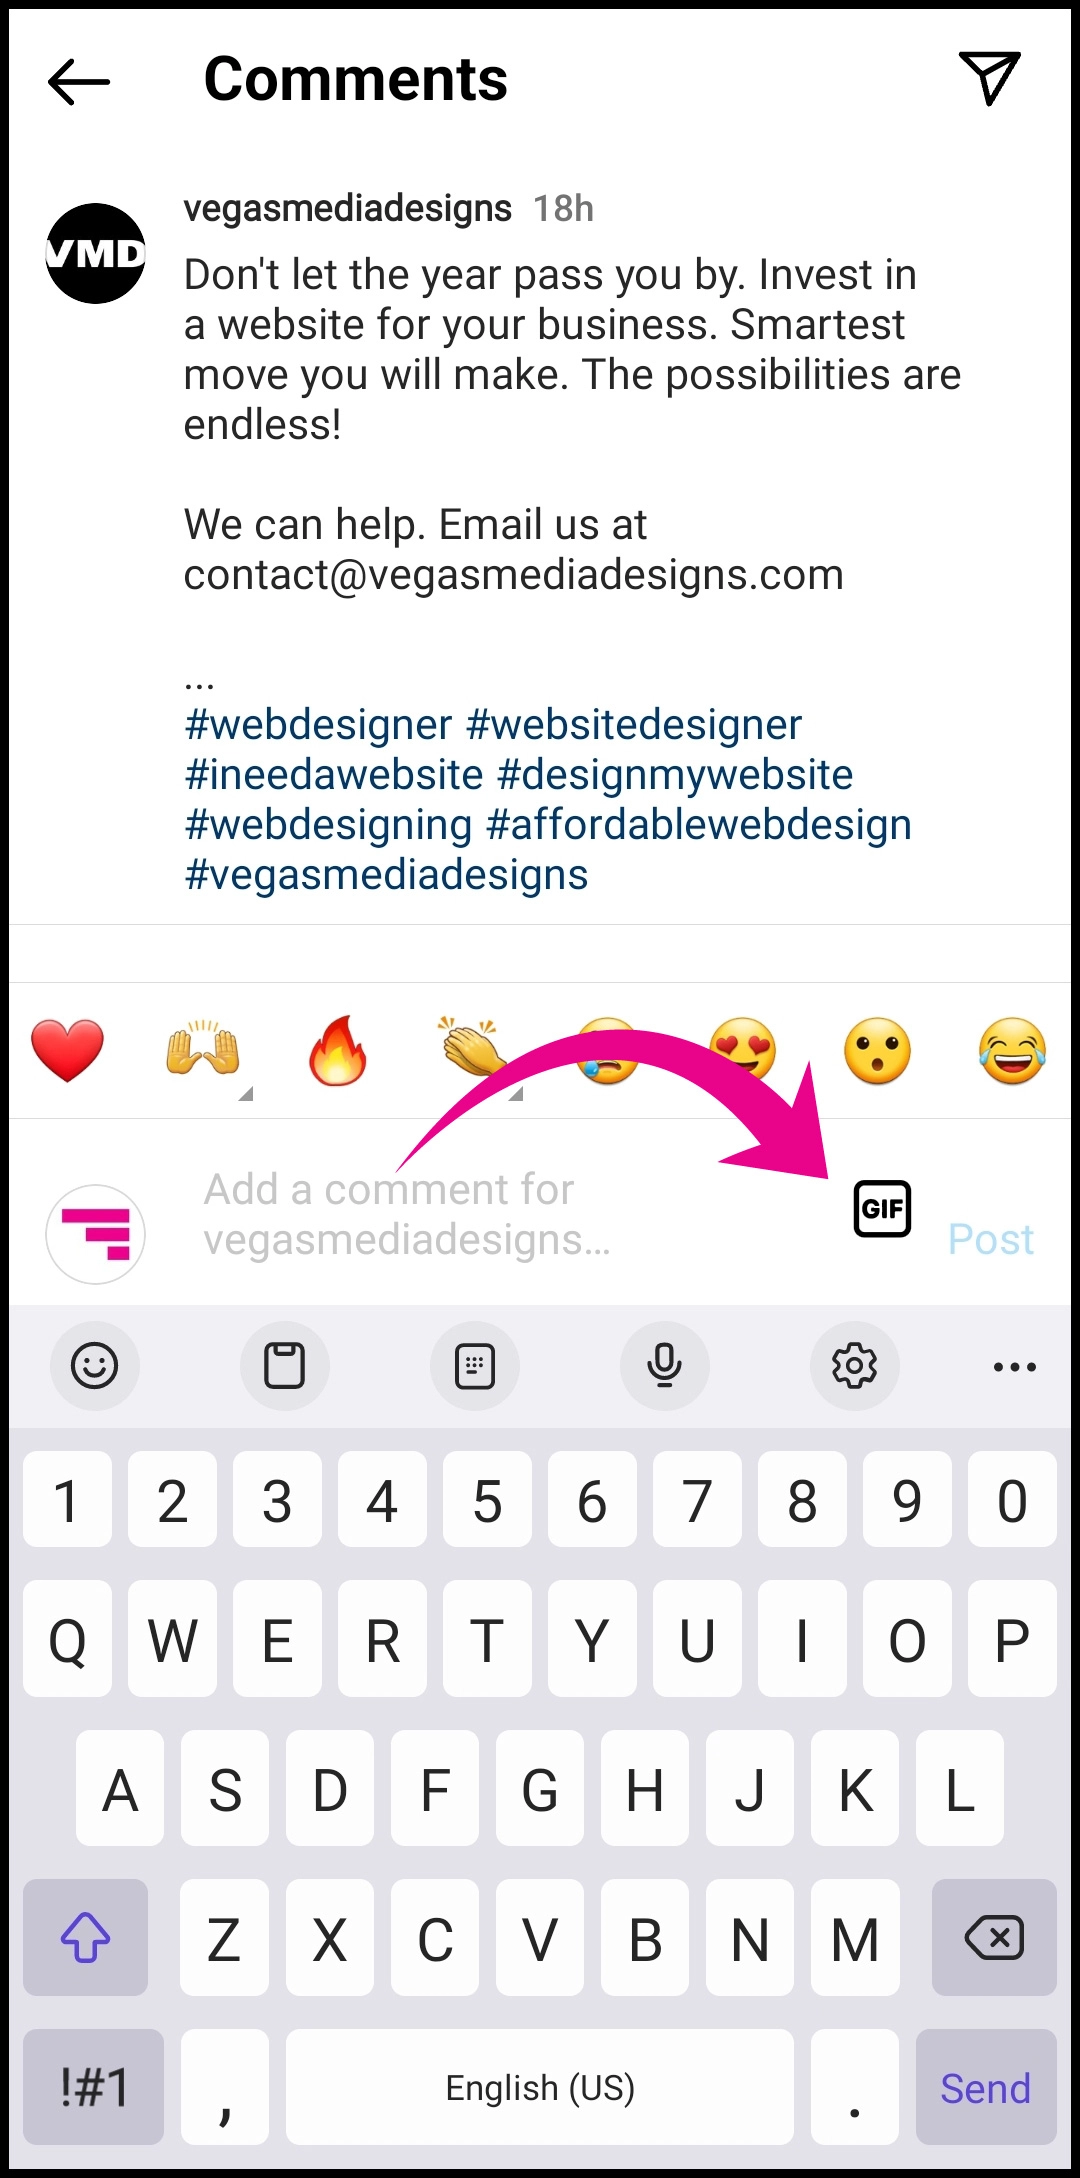 How to Add GIFs in Instagram Comments